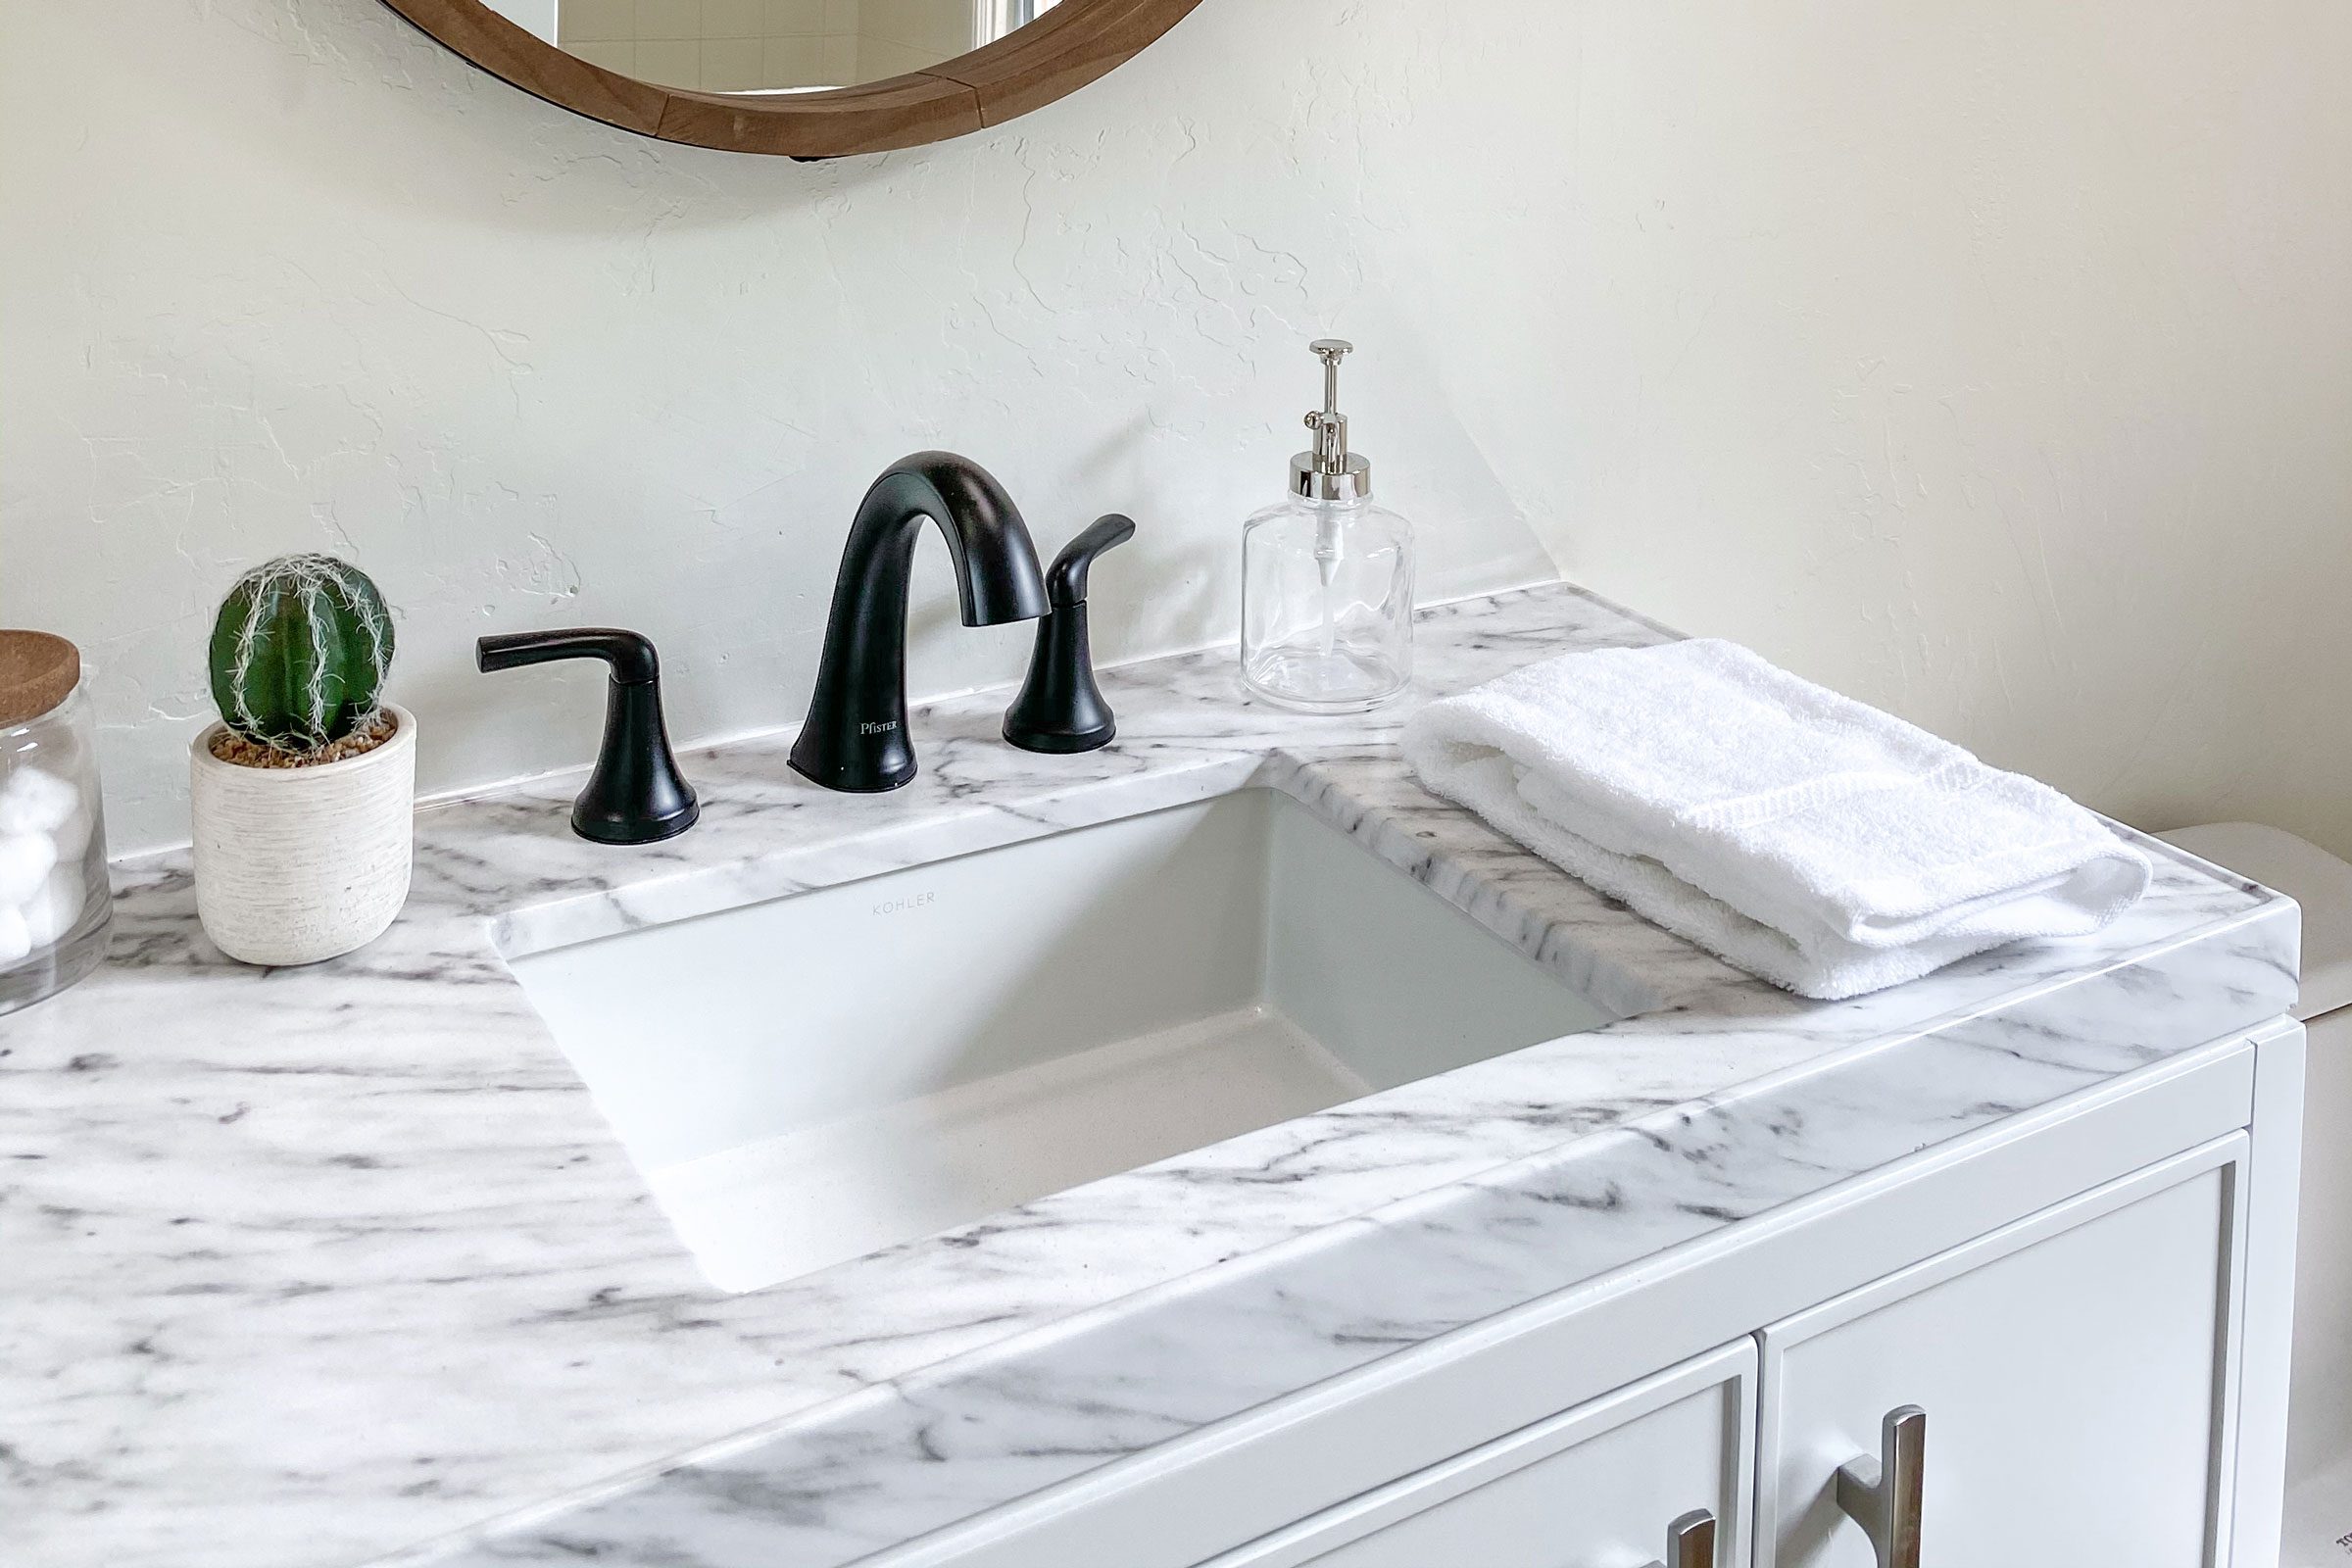 Choosing Bathroom Countertops: Which Style Is Best for You?